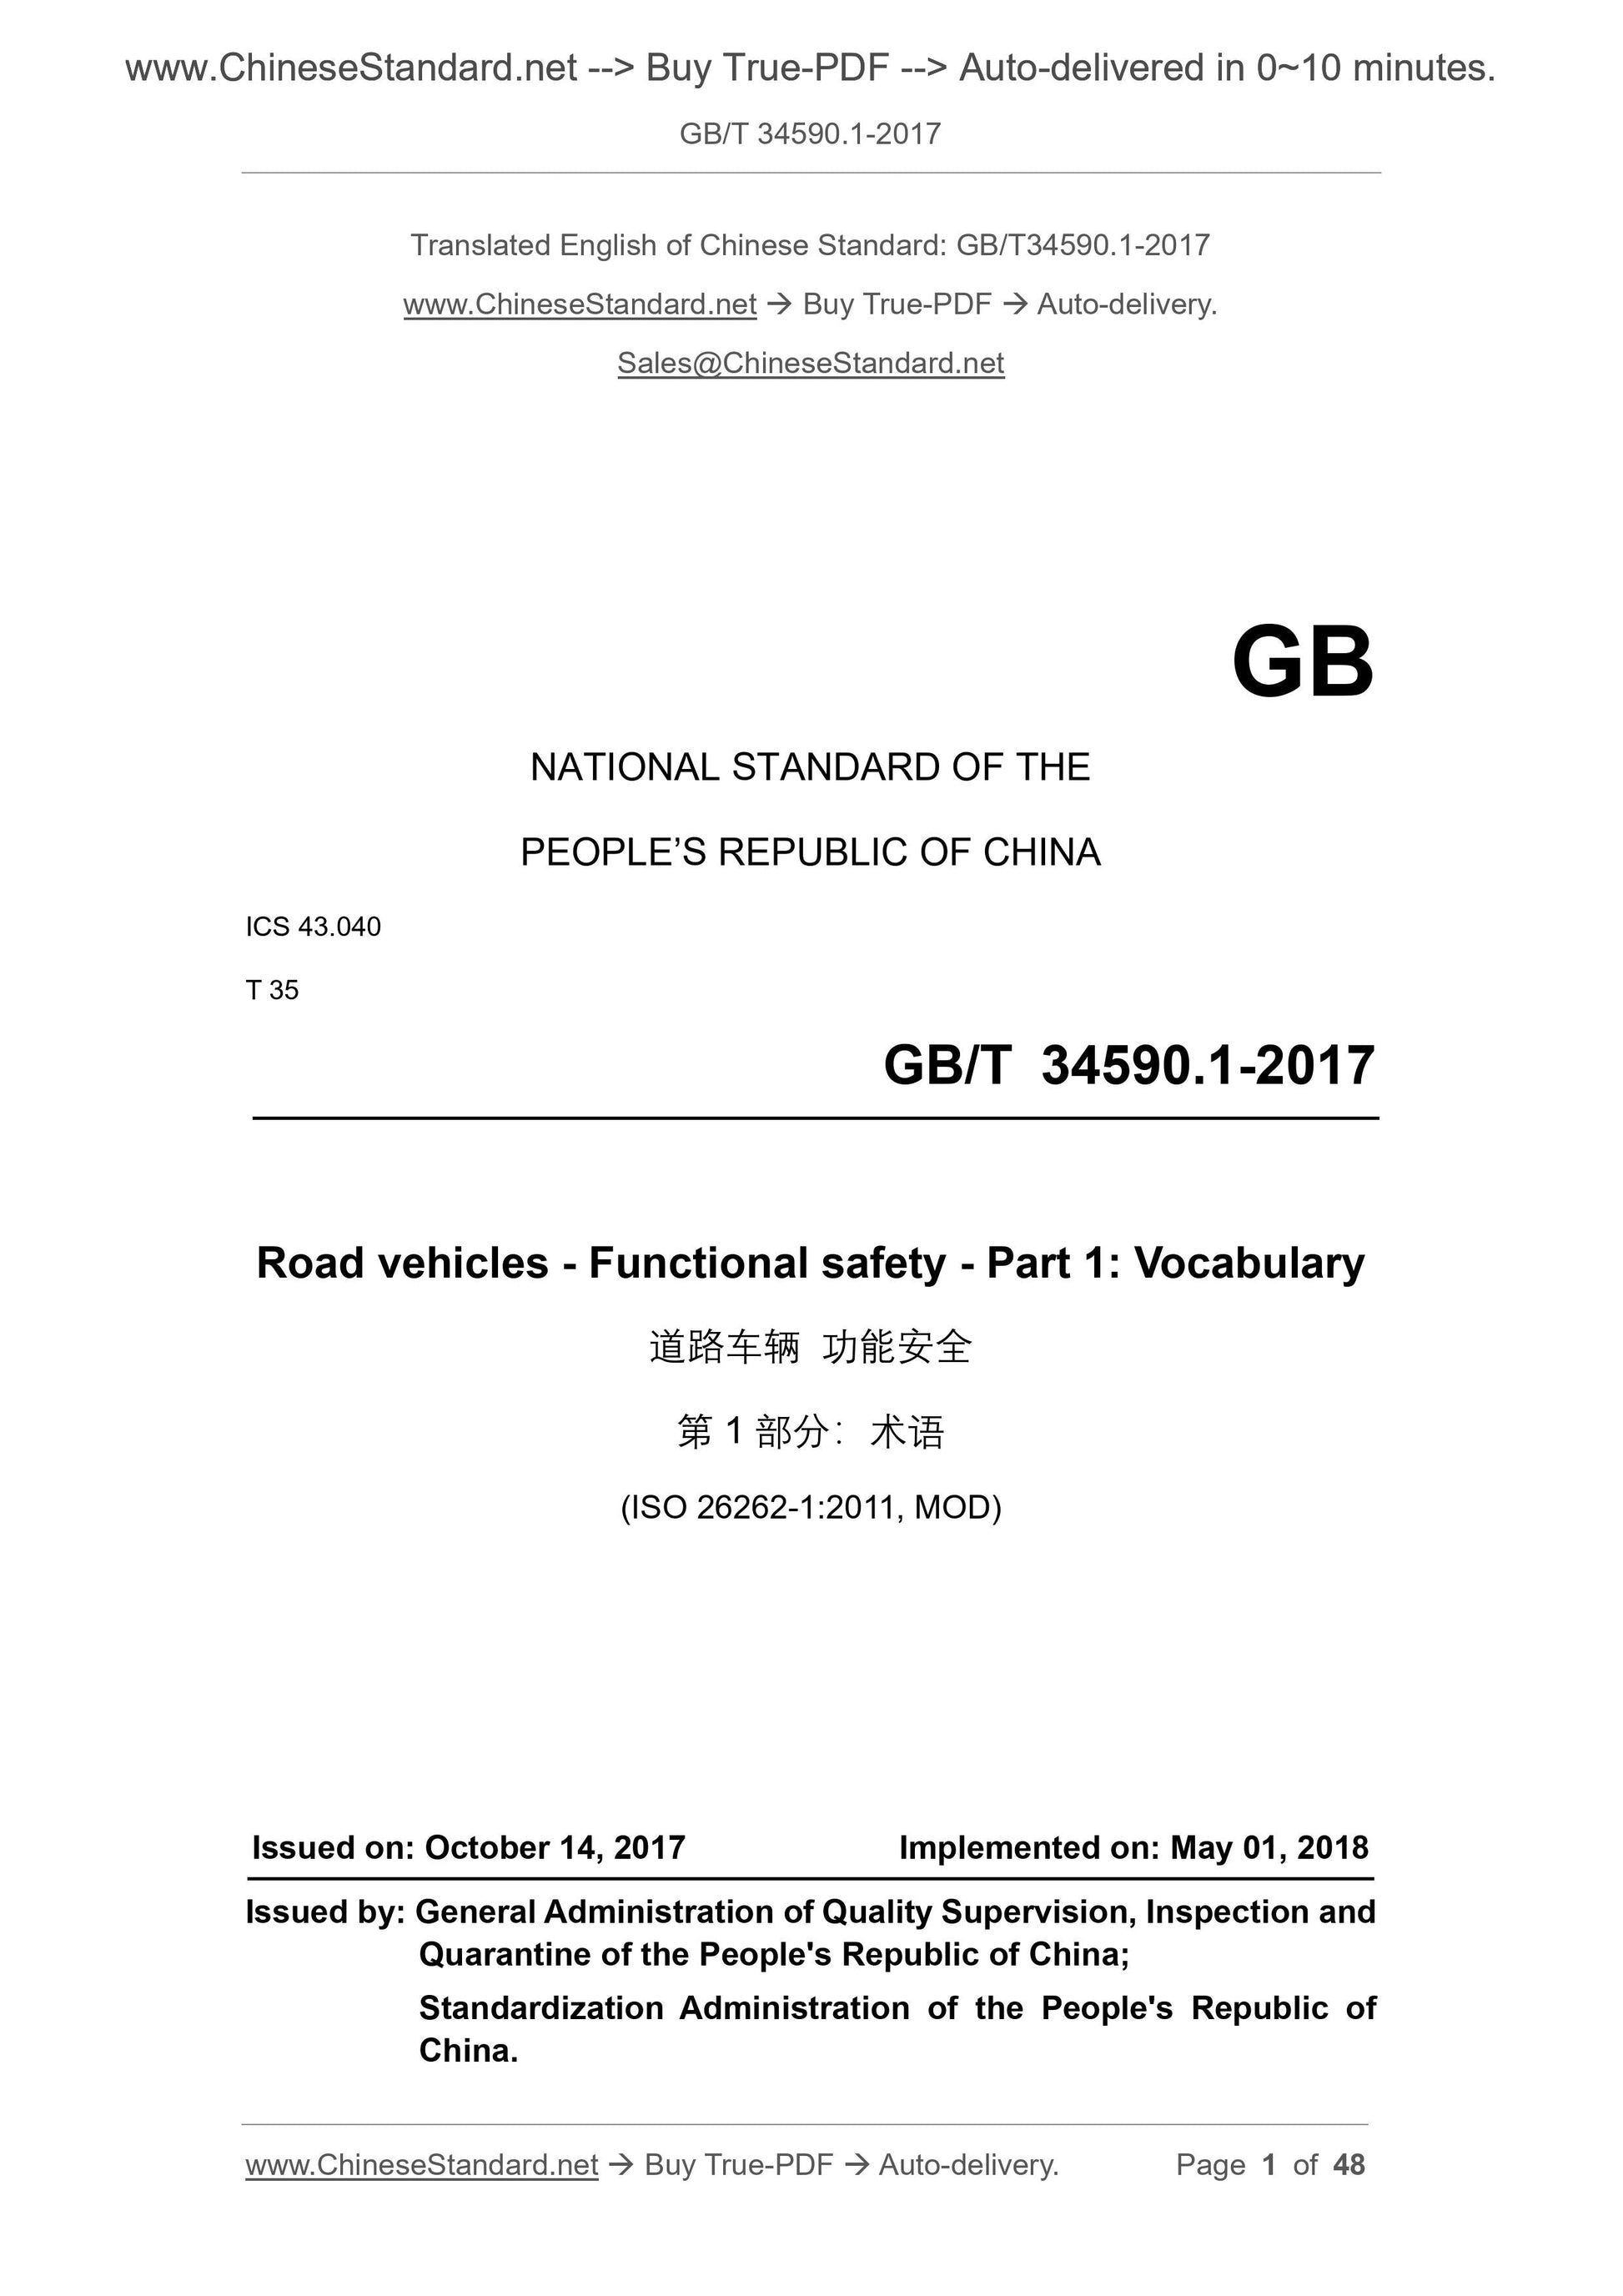 GB/T 34590.1-2017 Page 1